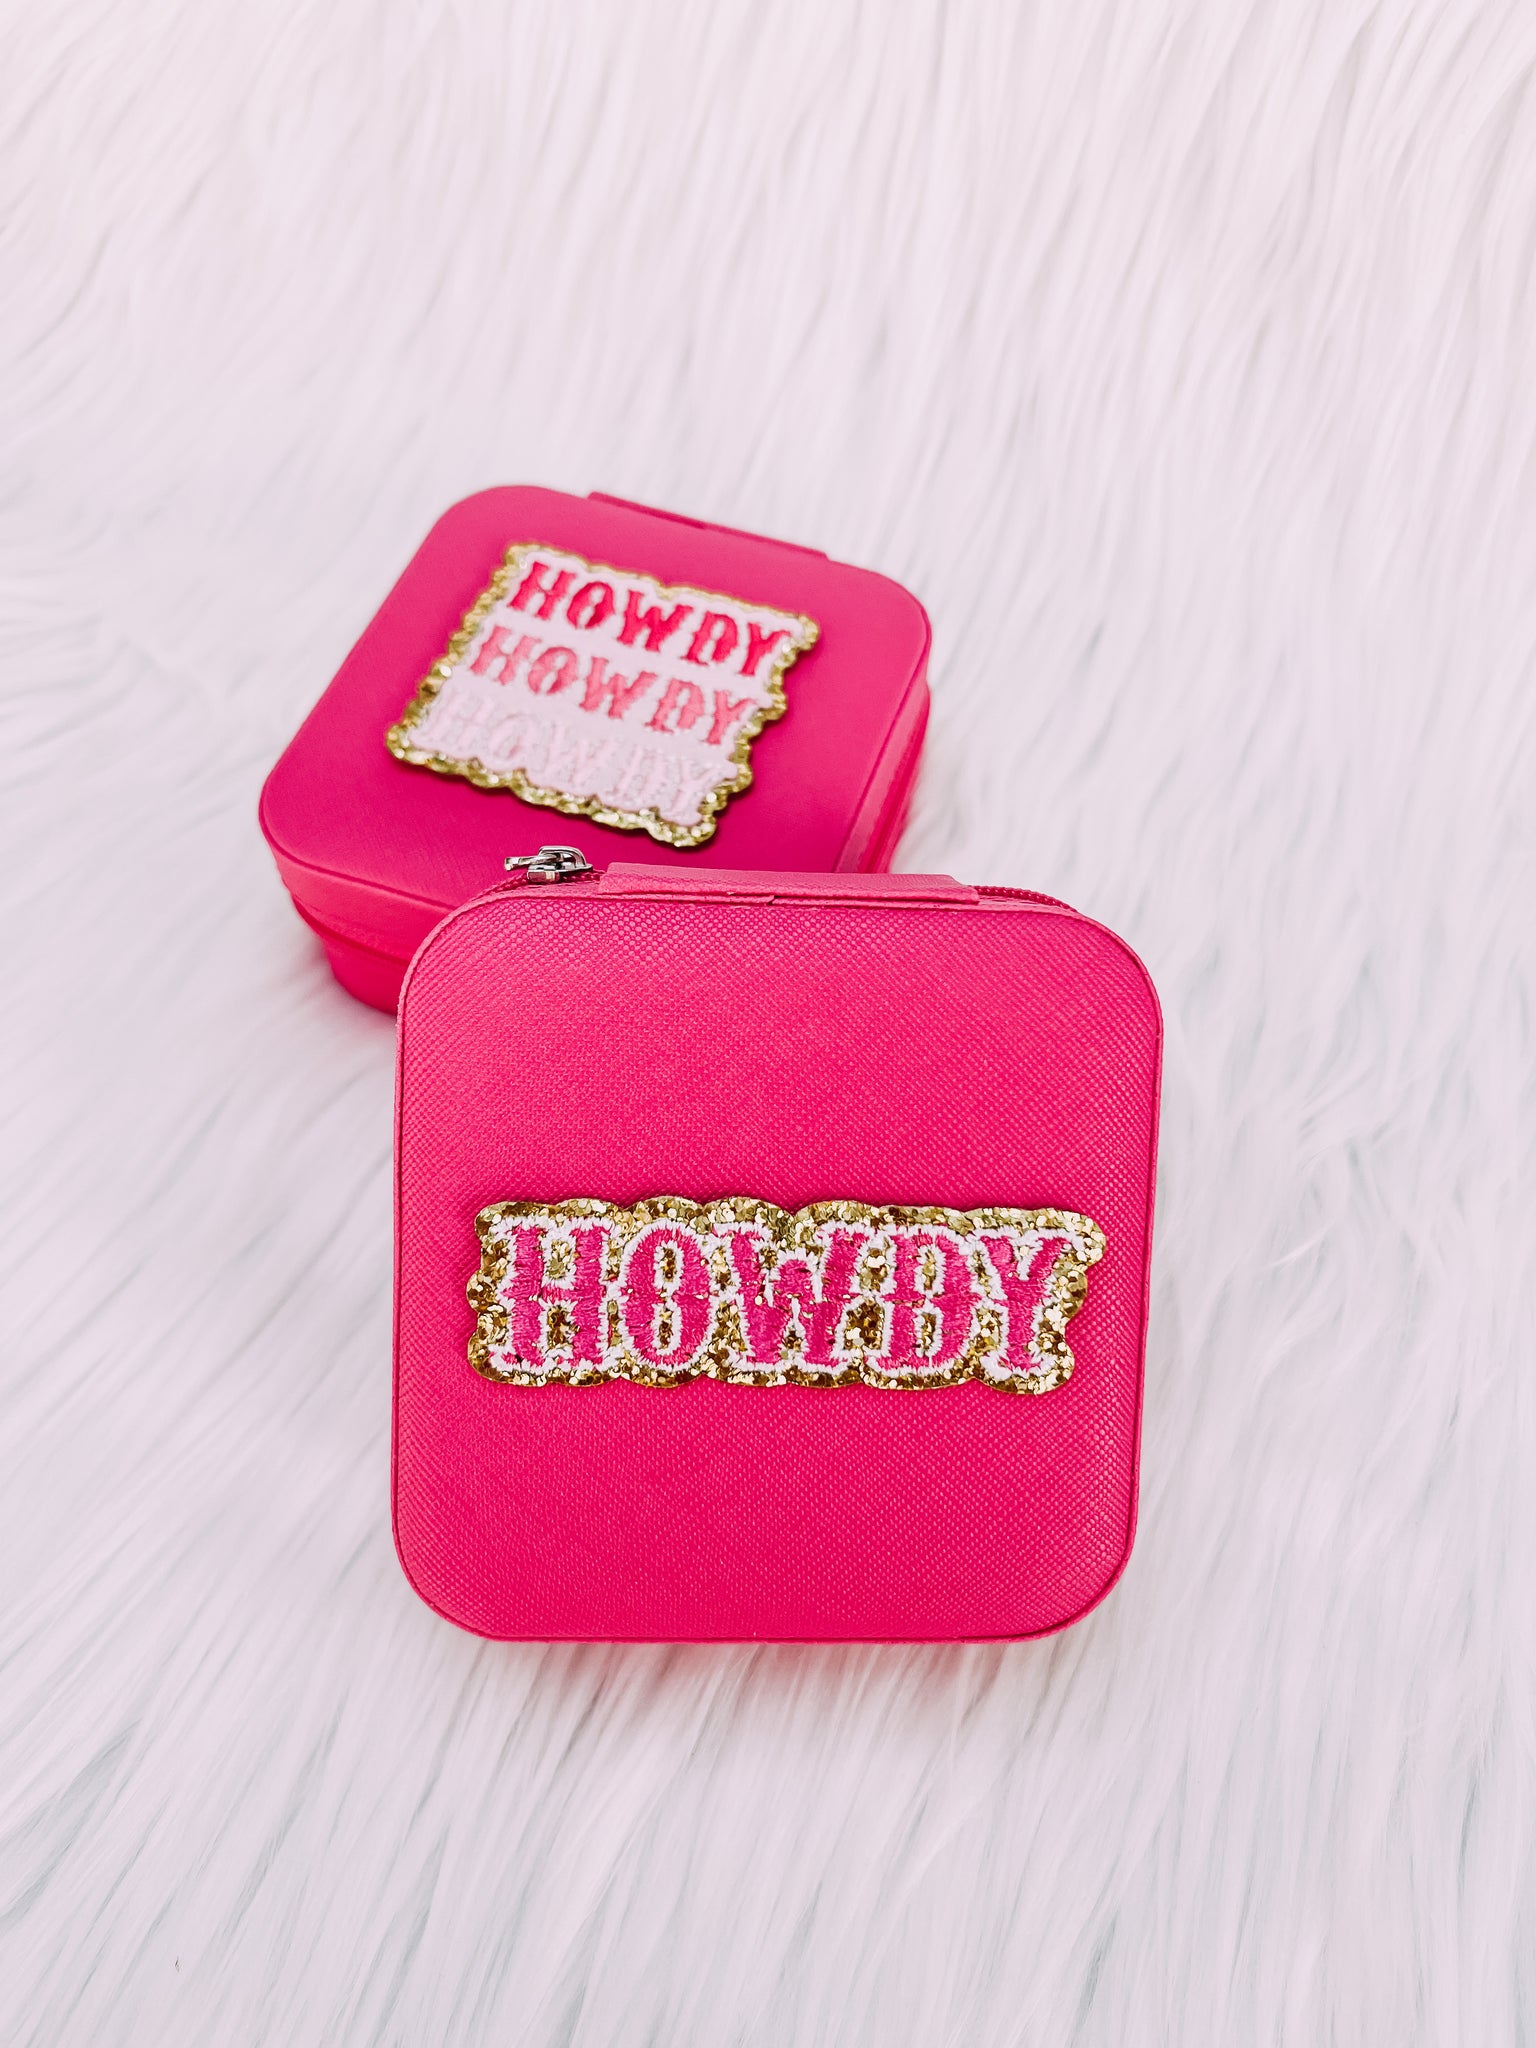 ✨LIMITED EDITION✨ "HOWDY" Jewelry Box